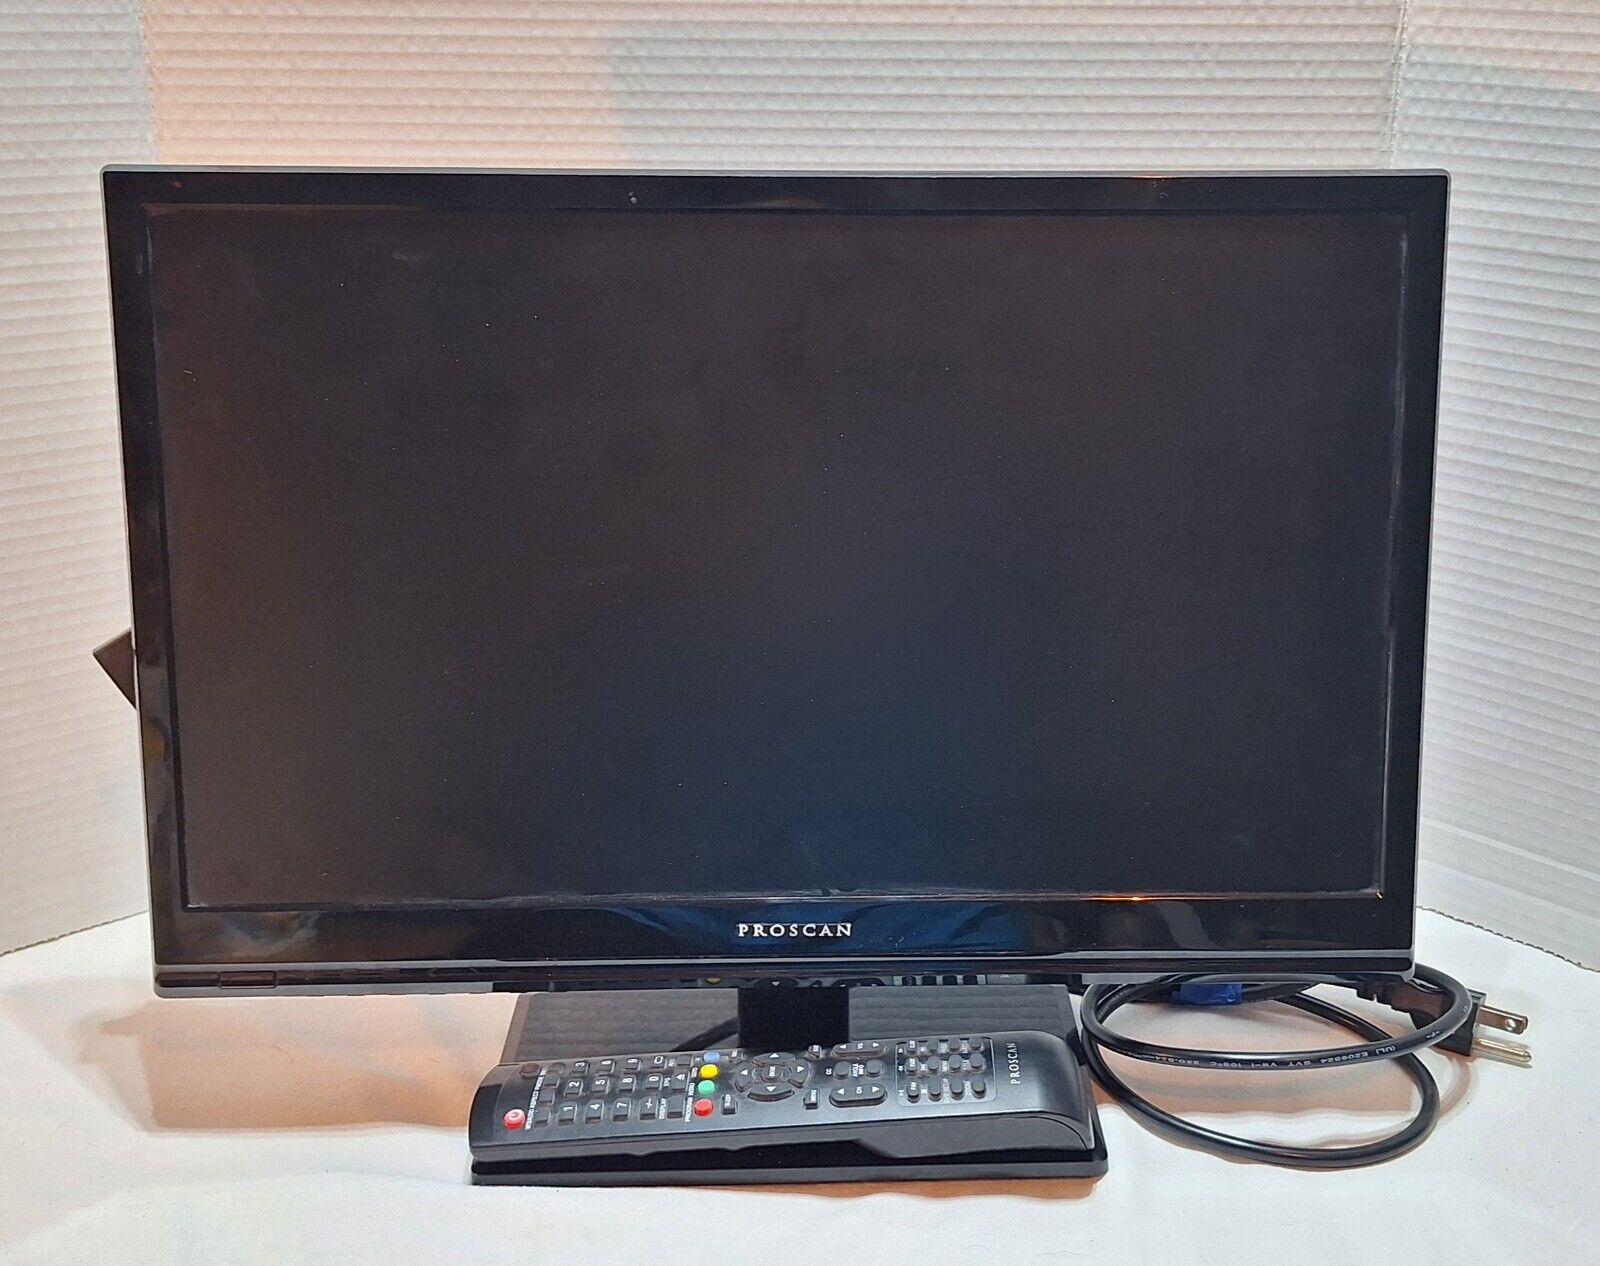 Proscan 19 Inch Wide Screen TV/MONITOR MODEL: PLEDV1945A-D. ...WITH REMOTE